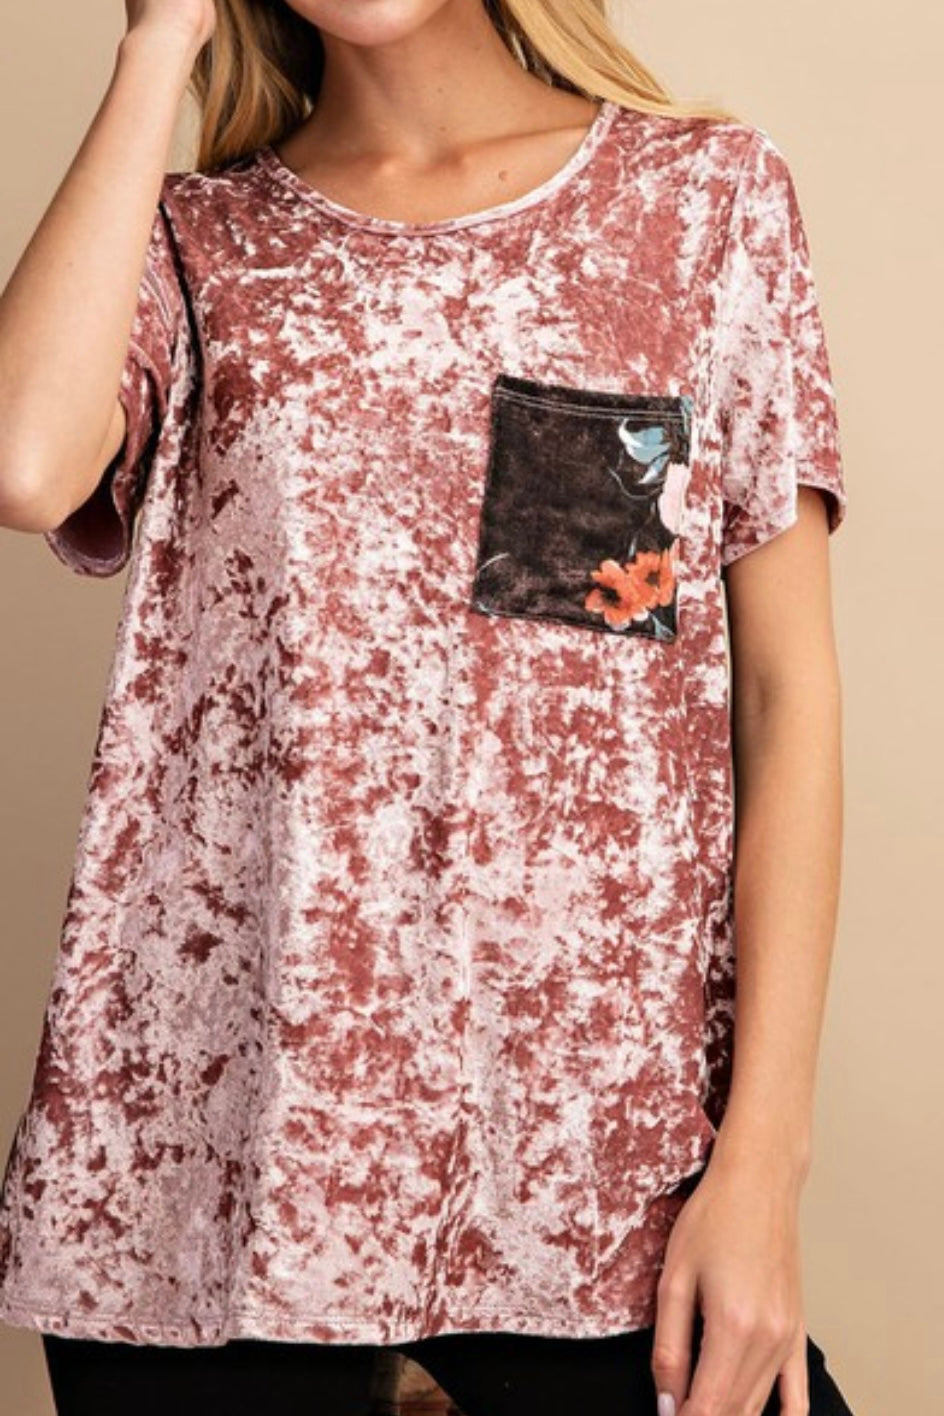 CRUSHED VELVET WITH FLORAL PRINTED CONTRAST TOP